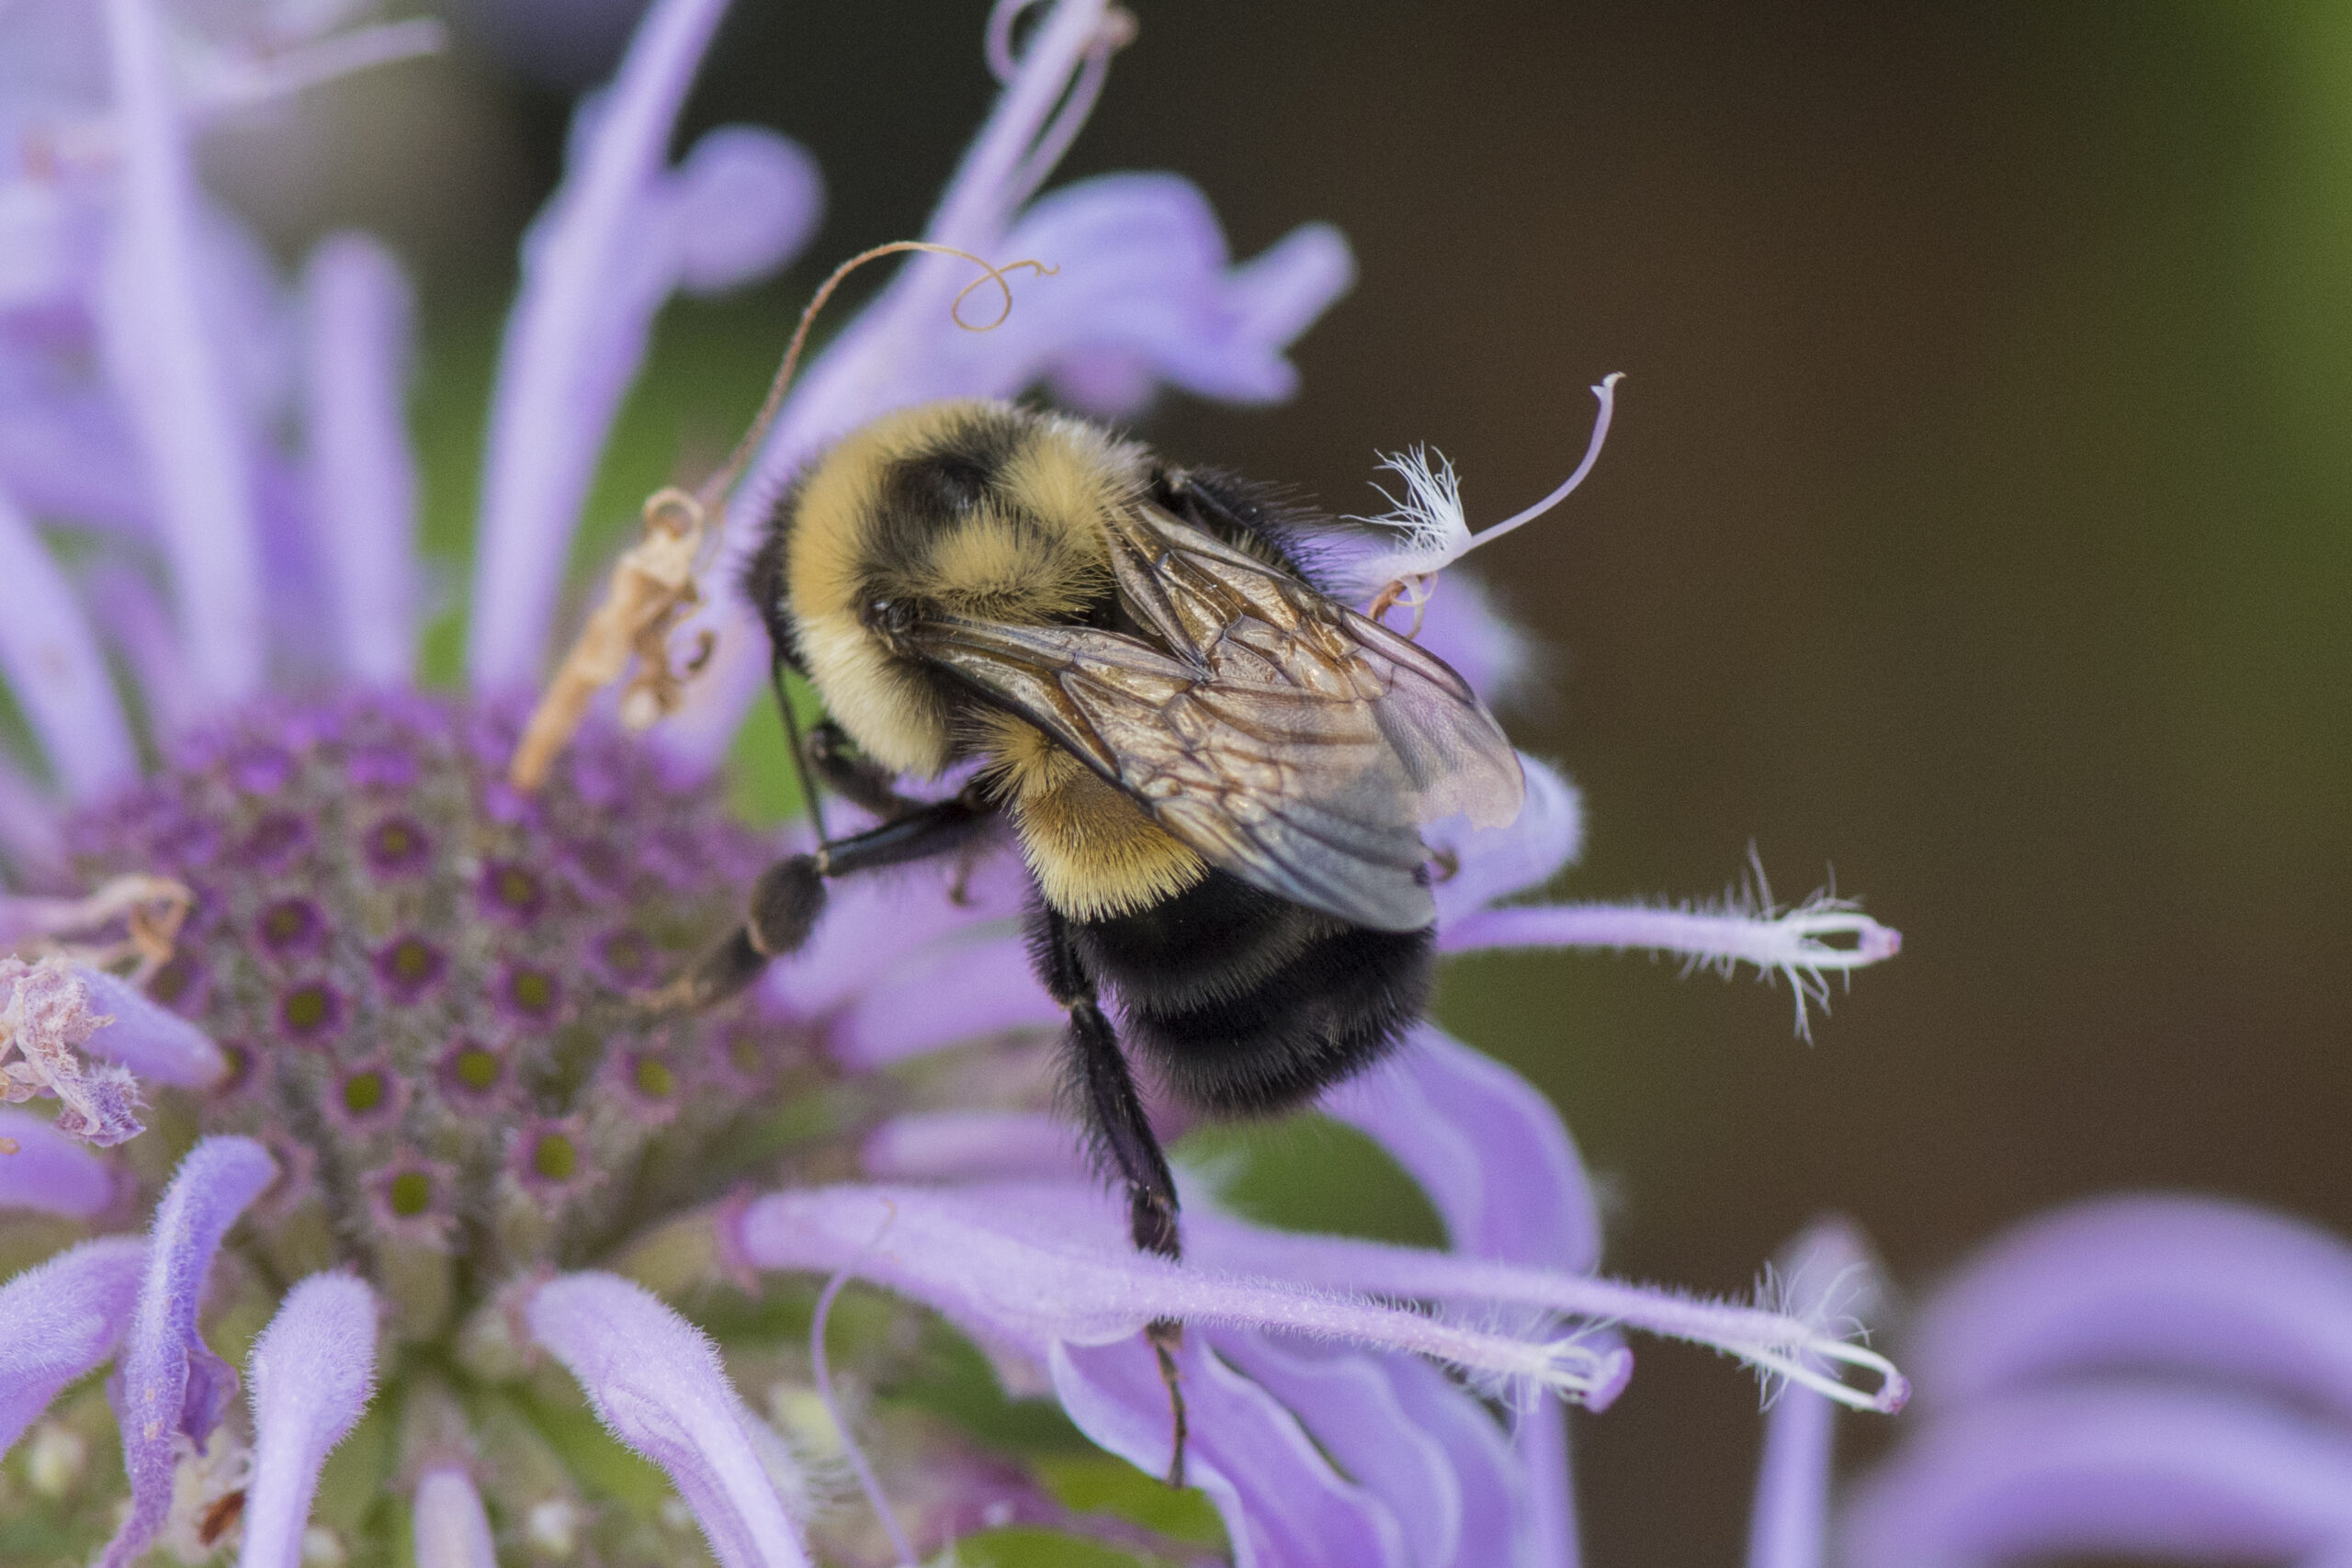 The rusty patched bumble bee, a federally endangered species, is one of 12 bumble bee species found on the UW-Green Bay campus